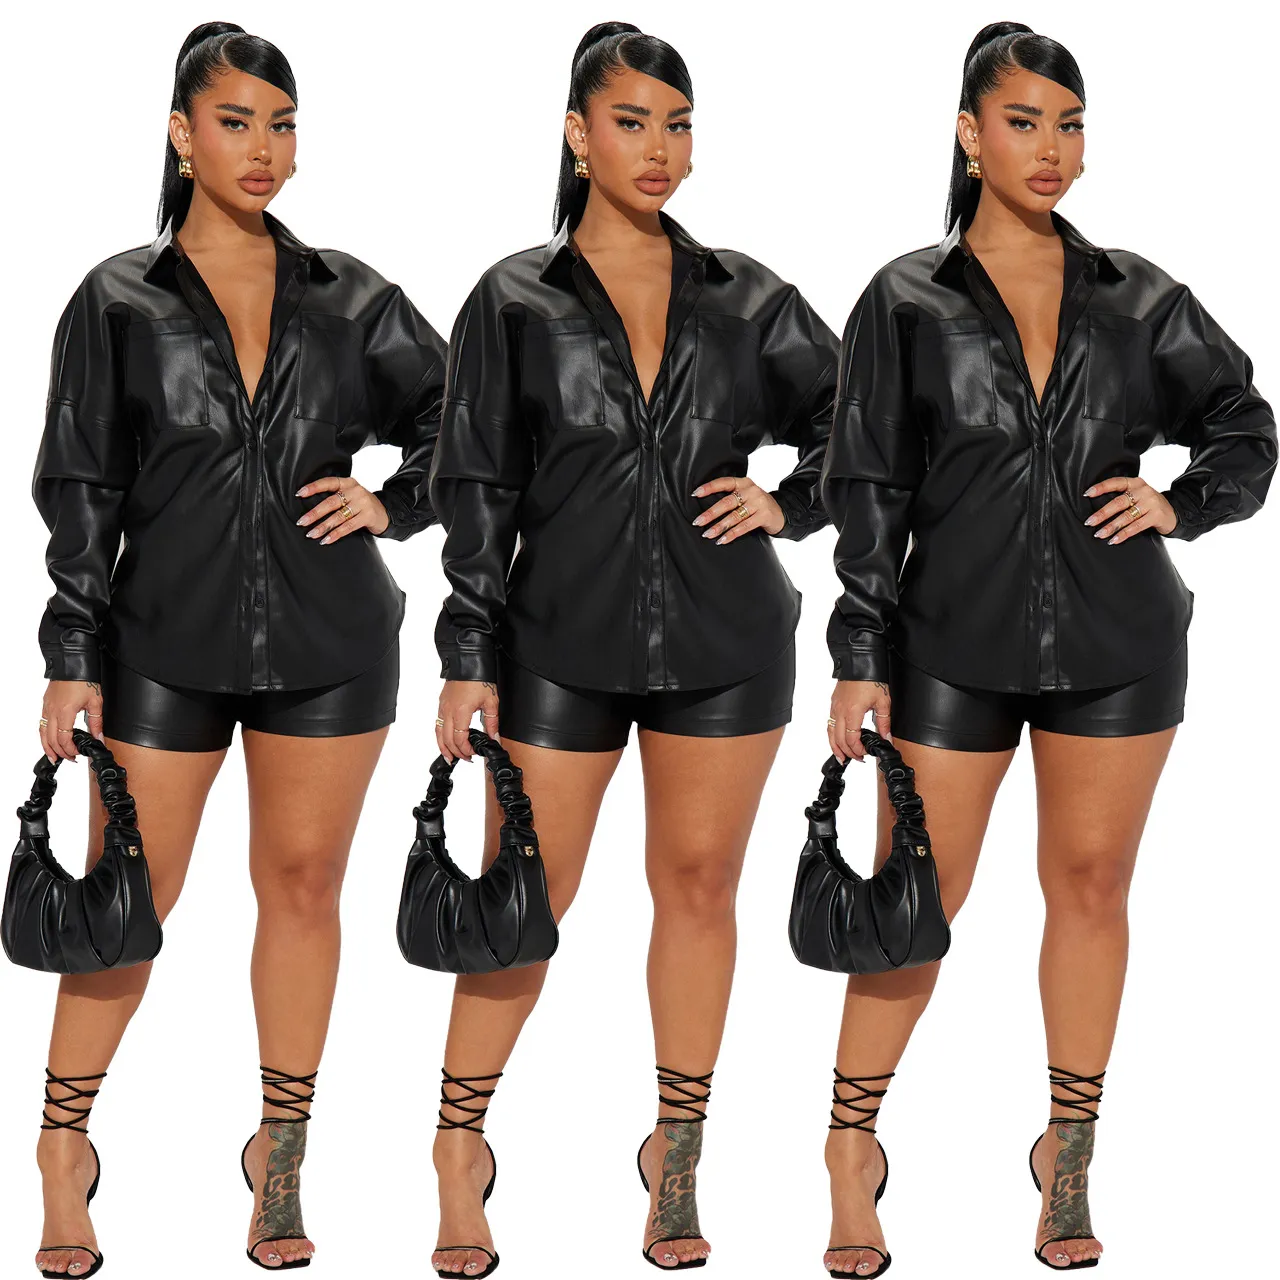 Black Pu Two Piece Pants Casual Outfits Women Fashion Leather Jacket and Shorts Set Free Ship